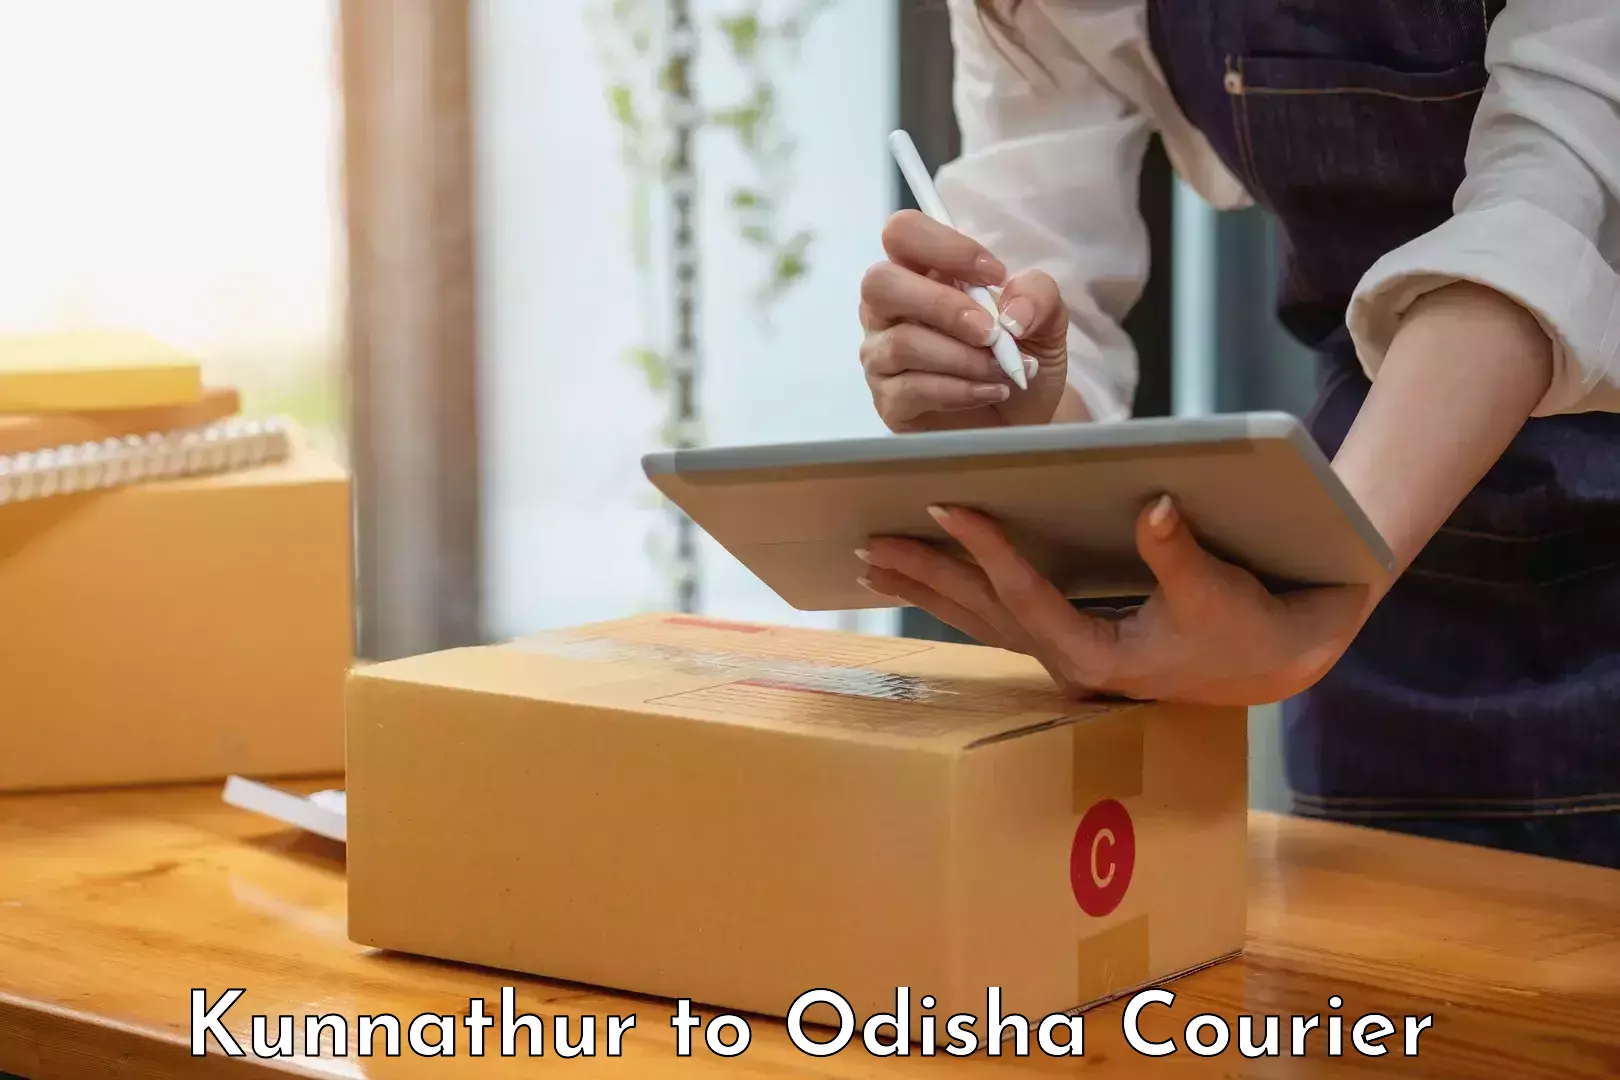 State-of-the-art courier technology Kunnathur to Chandbali